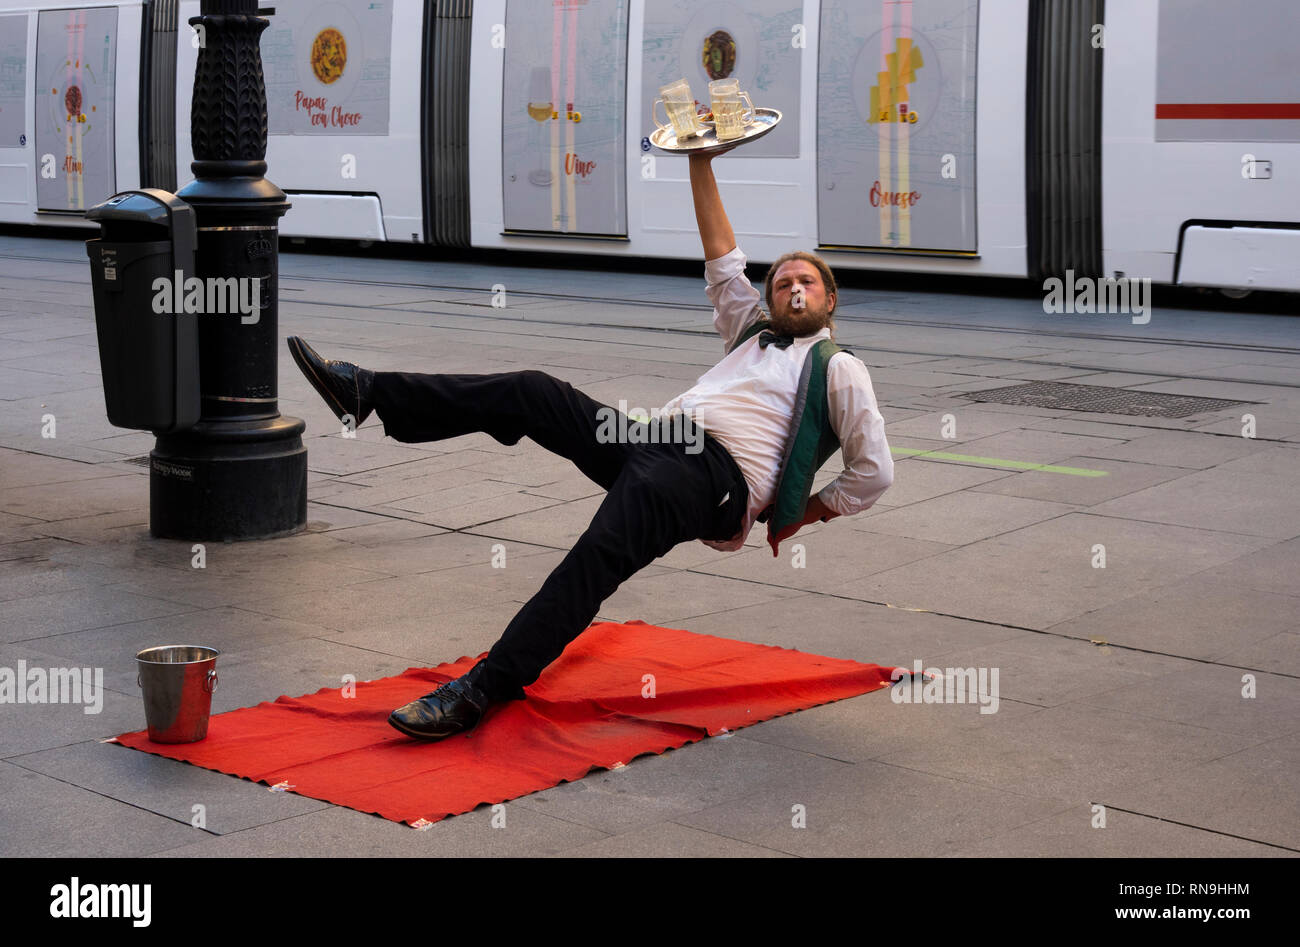 Street performer holding a pose on the street in Seville, Spain Stock Photo